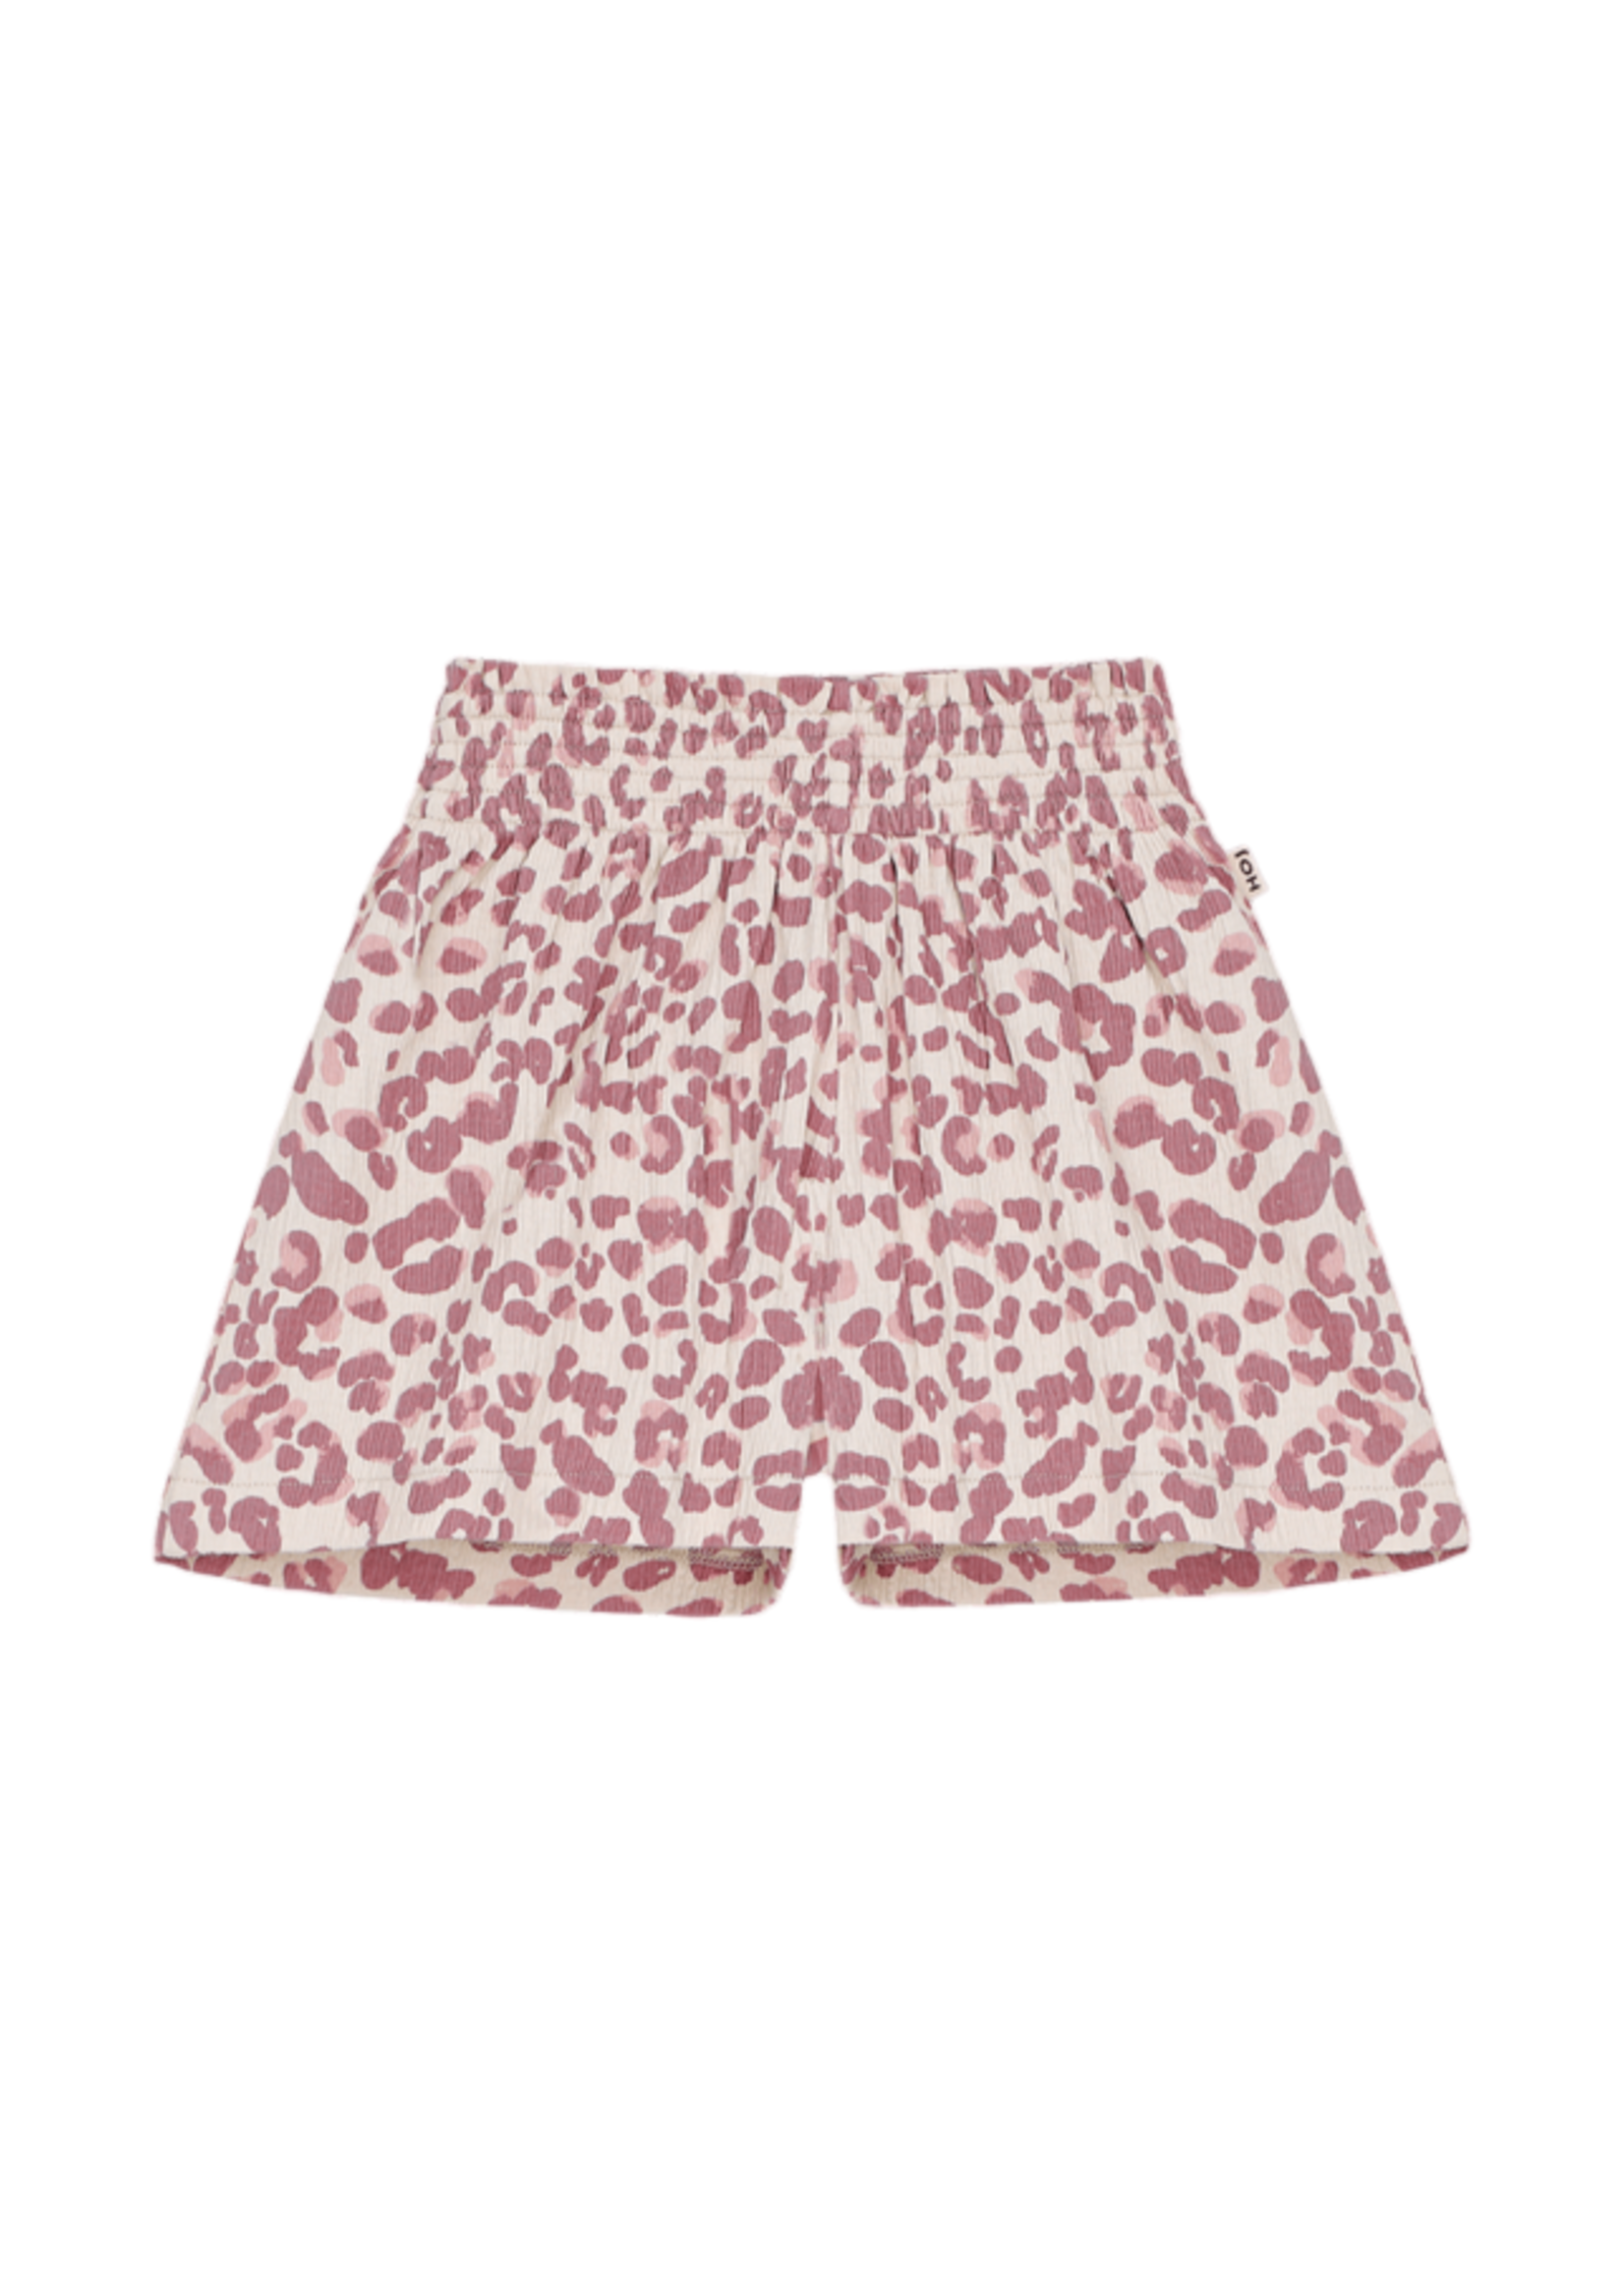 House of jamie Girls relaxed shorts rose leo - House of Jamie